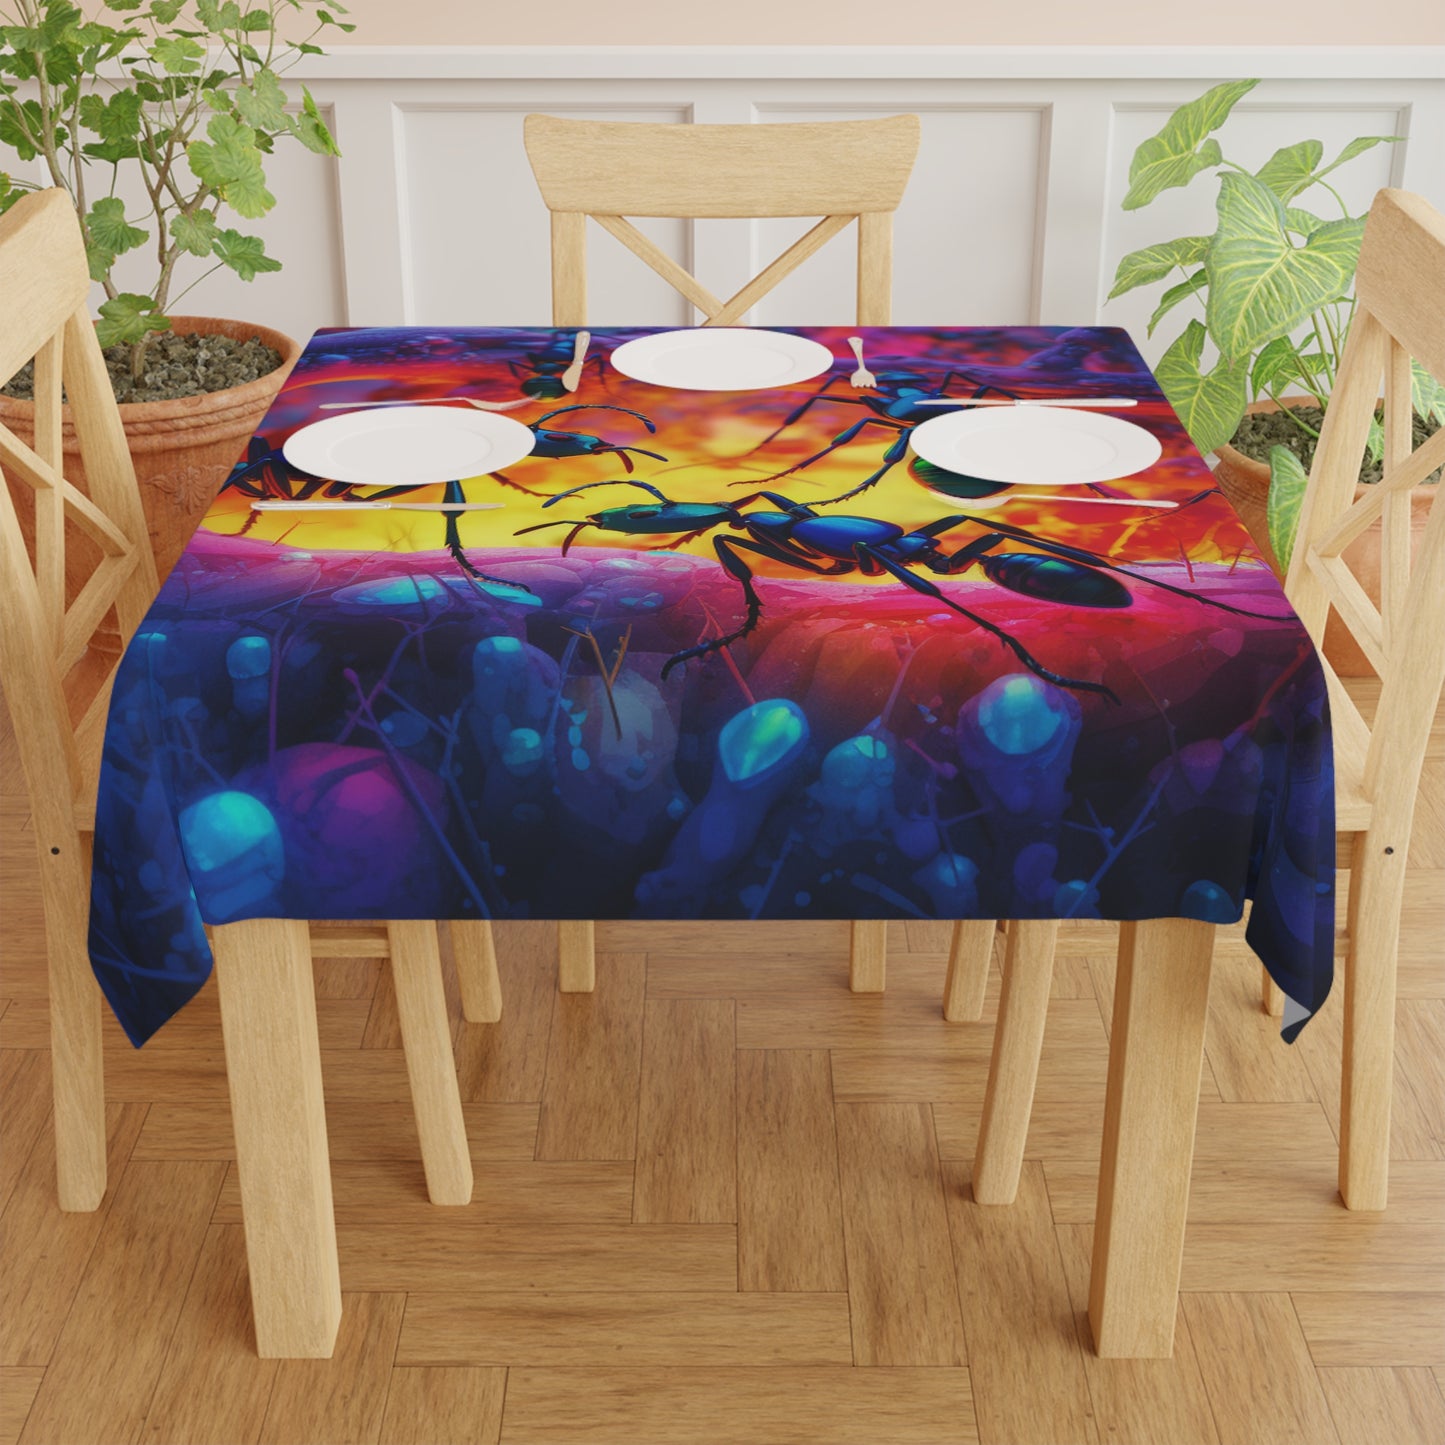 Tablecloth Ants Home 3